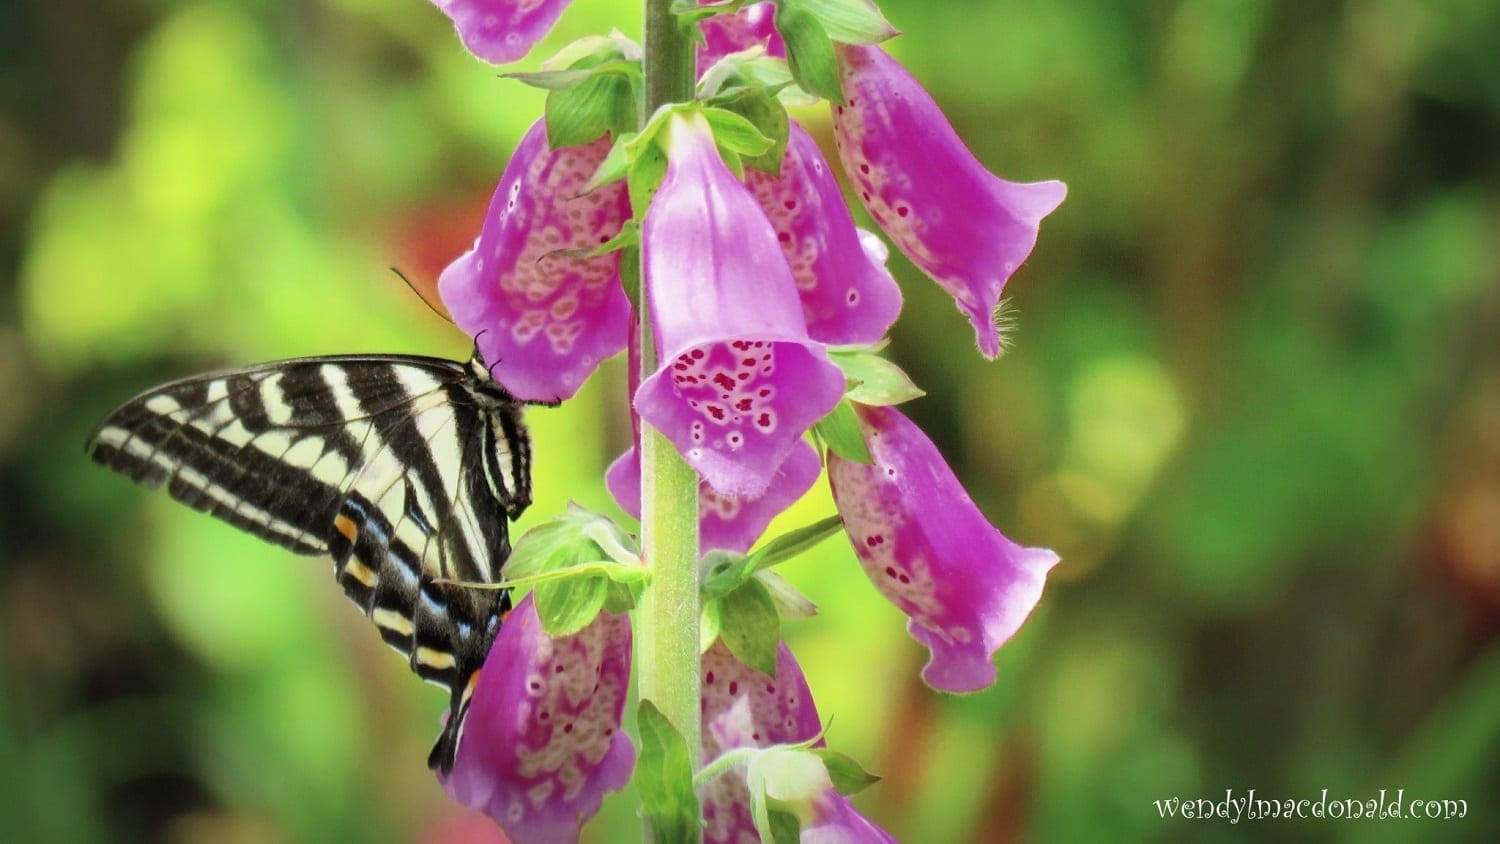 Swallowtail butterfly on foxgloves, photo credit: Wendy MacDonald